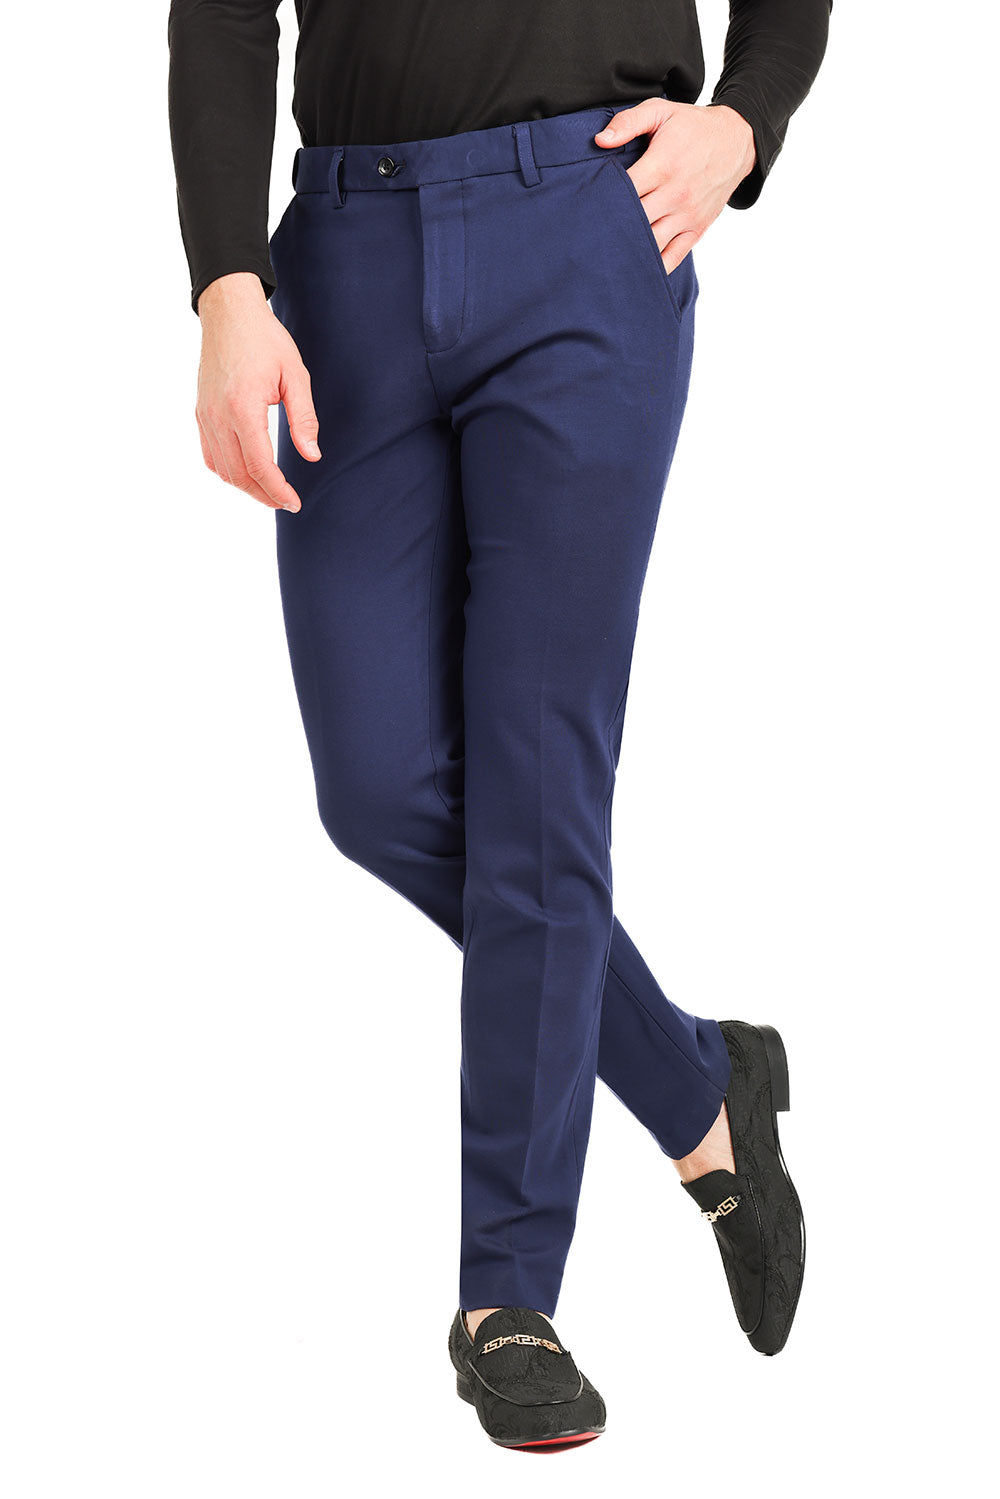 Barabas Men's Solid Color Basic Essential Chino Dress Pants 2CP196 Navy